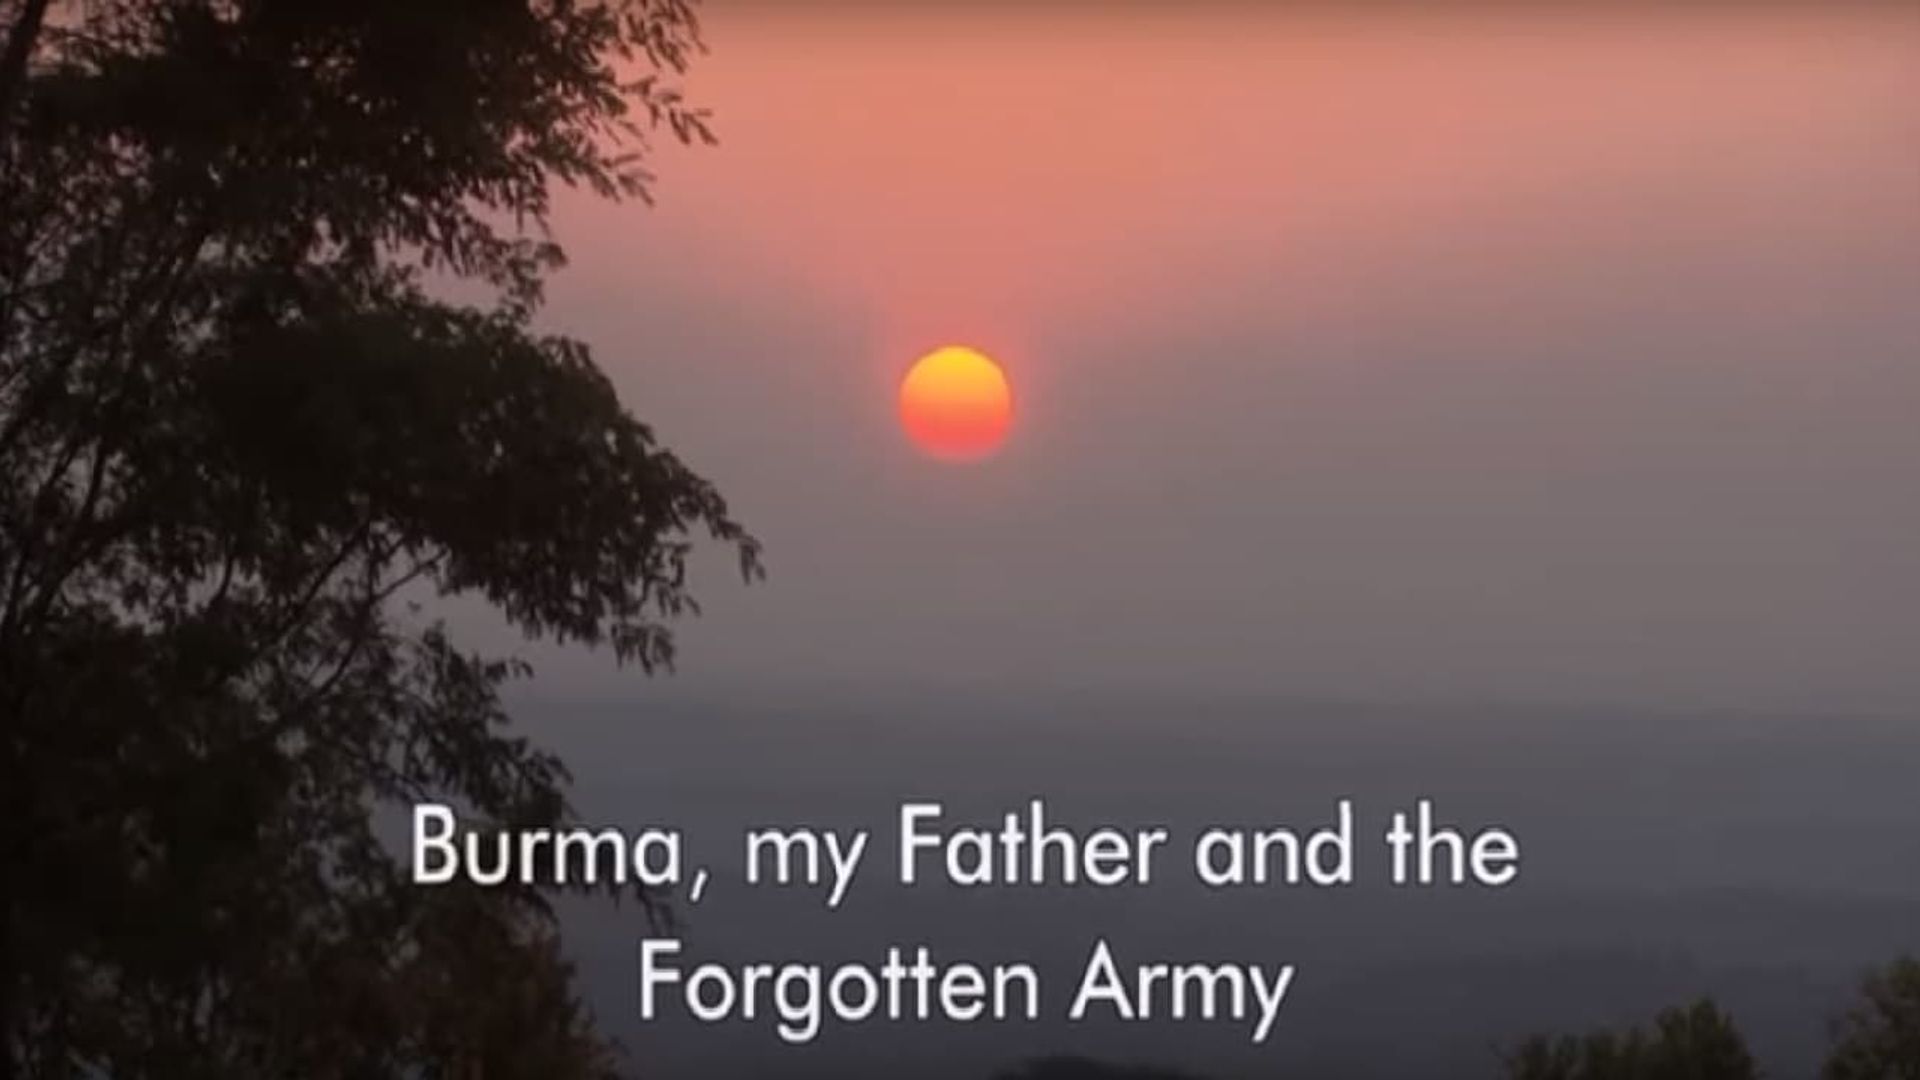 Burma, My Father and the Forgotten Army background